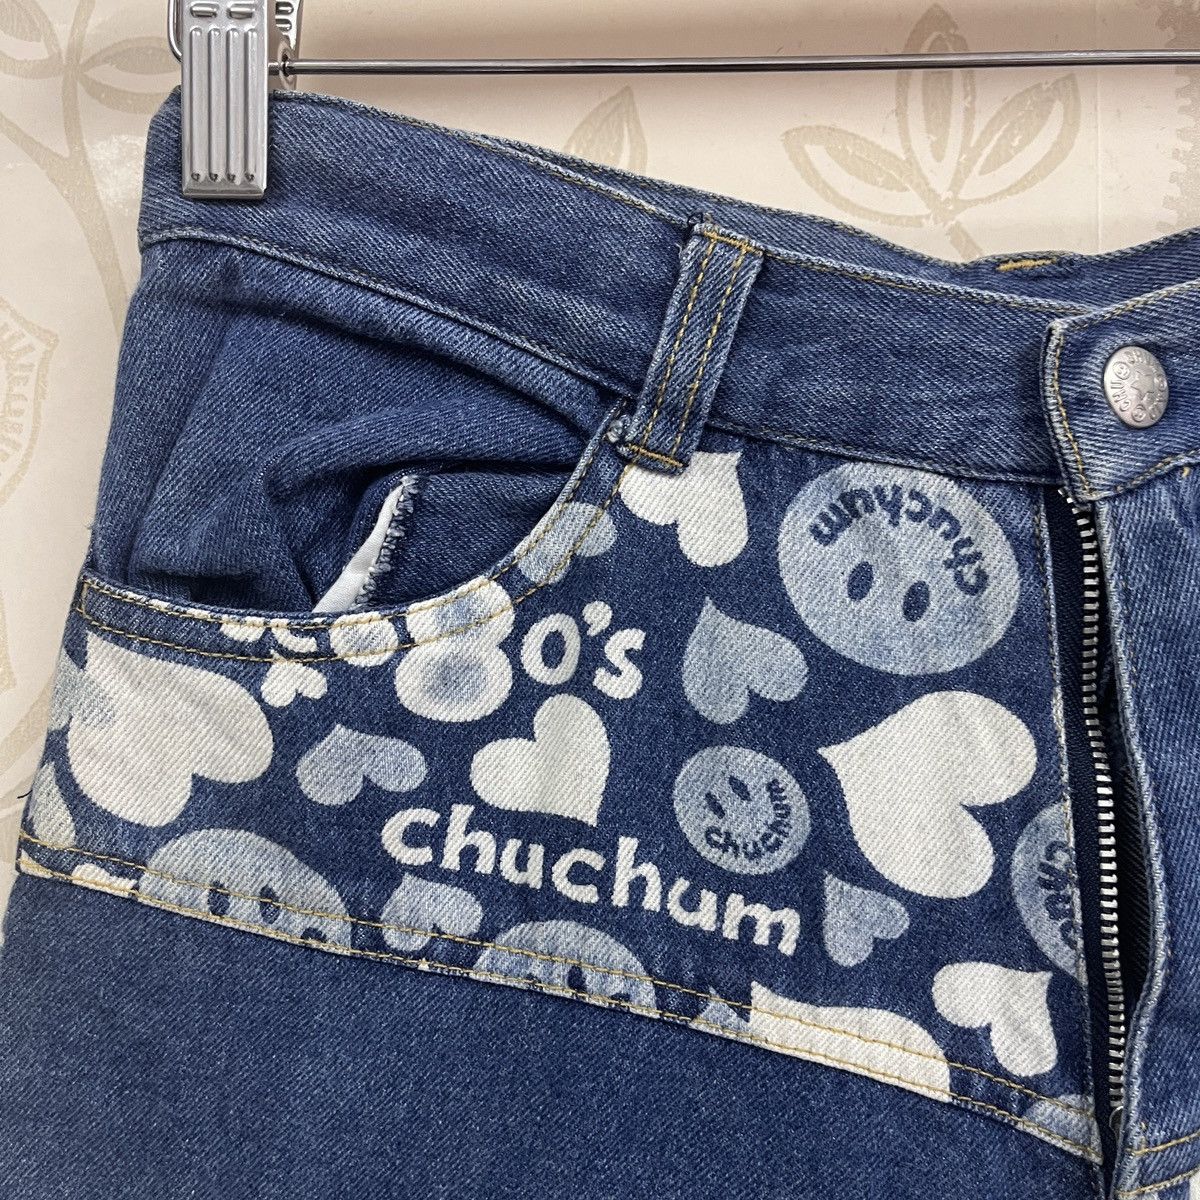 Vintage - Hysteric Flared Chuchum Full Printed Patches Denim Jeans - 6